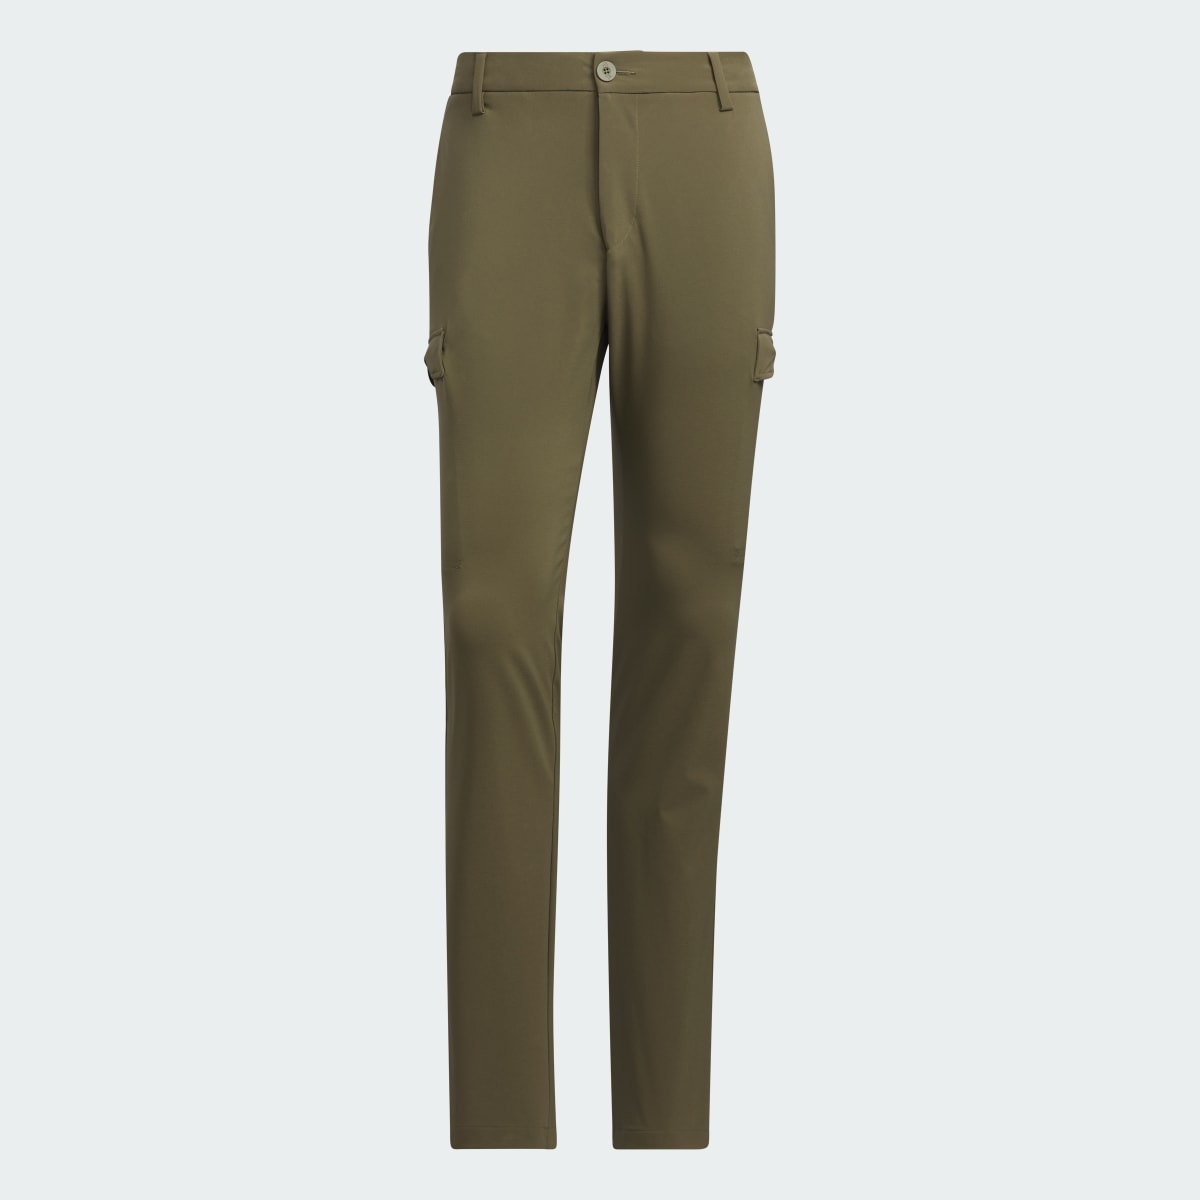 Adidas Go-To Cargo Pocket Long Trousers. 4